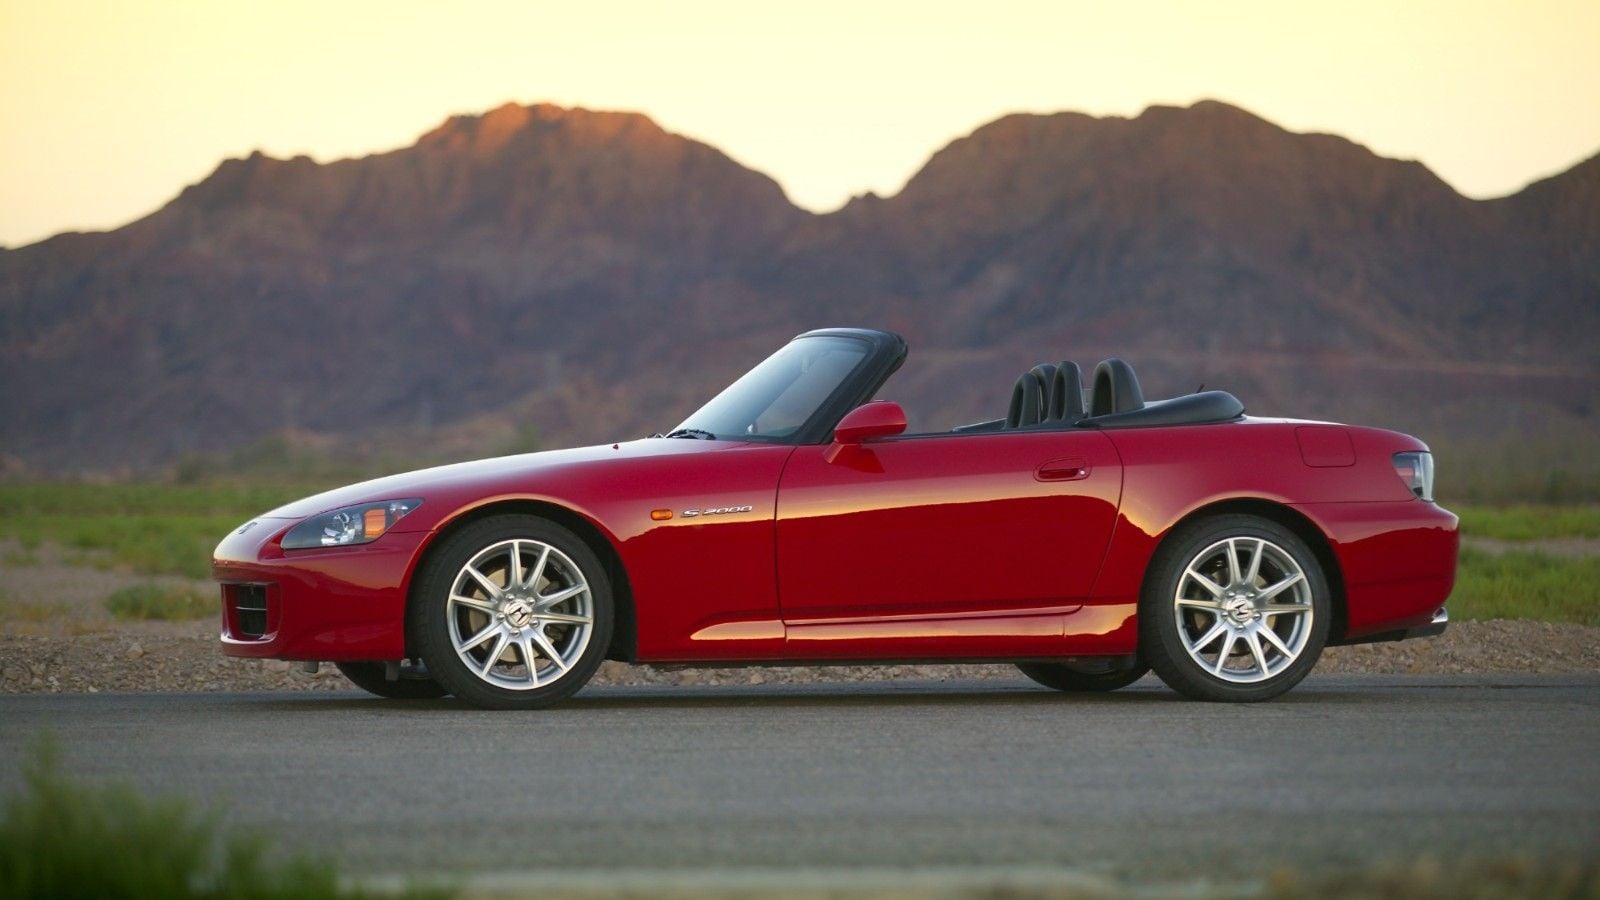 A Look Back at the Honda S2000: Is It the Legend We Remember It To Be?